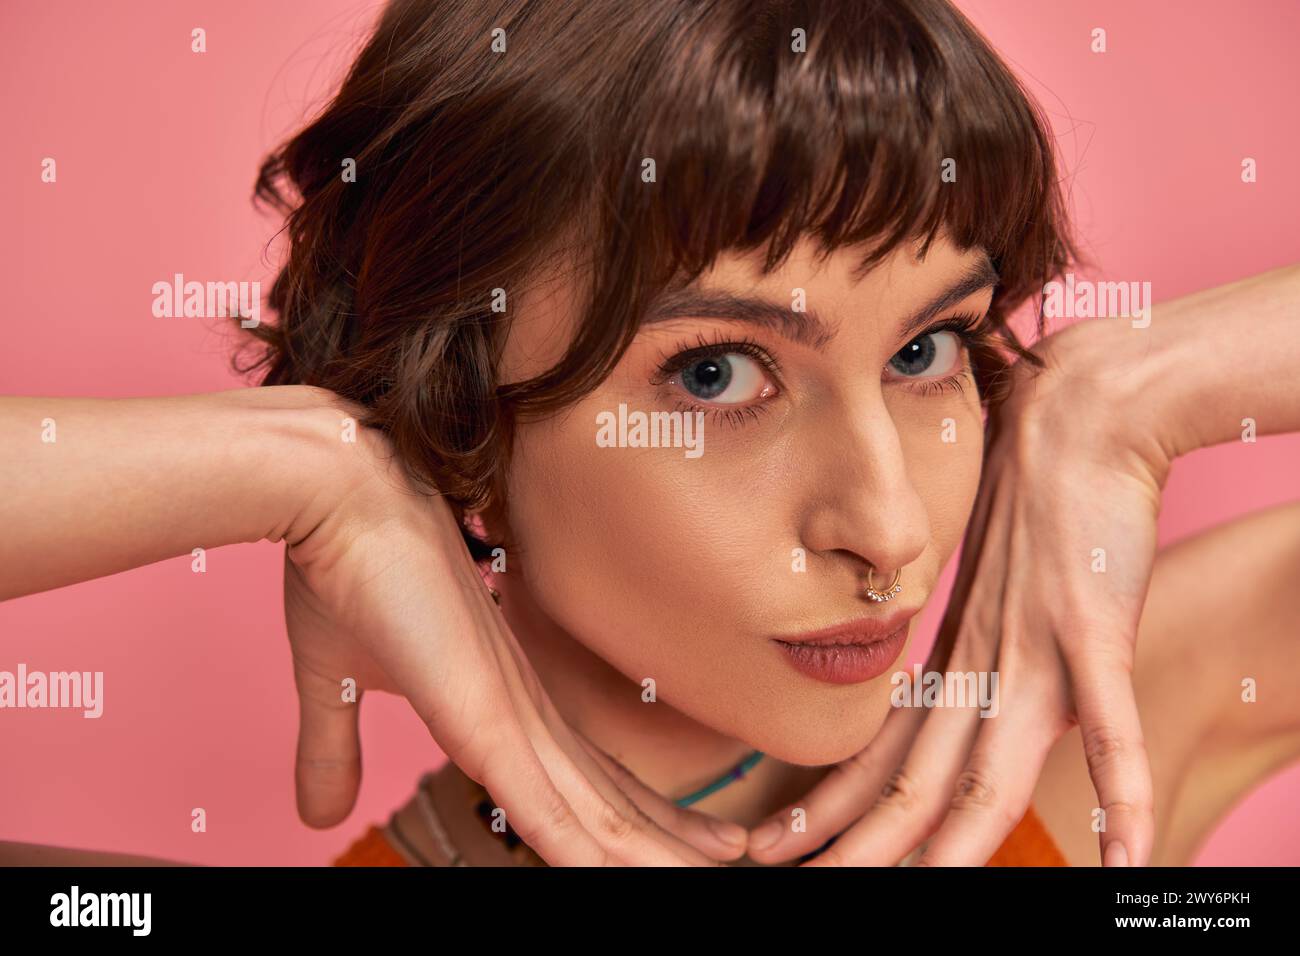 flirty young woman with nose piercing and short brunette hair pouting lips on pink background Stock Photo